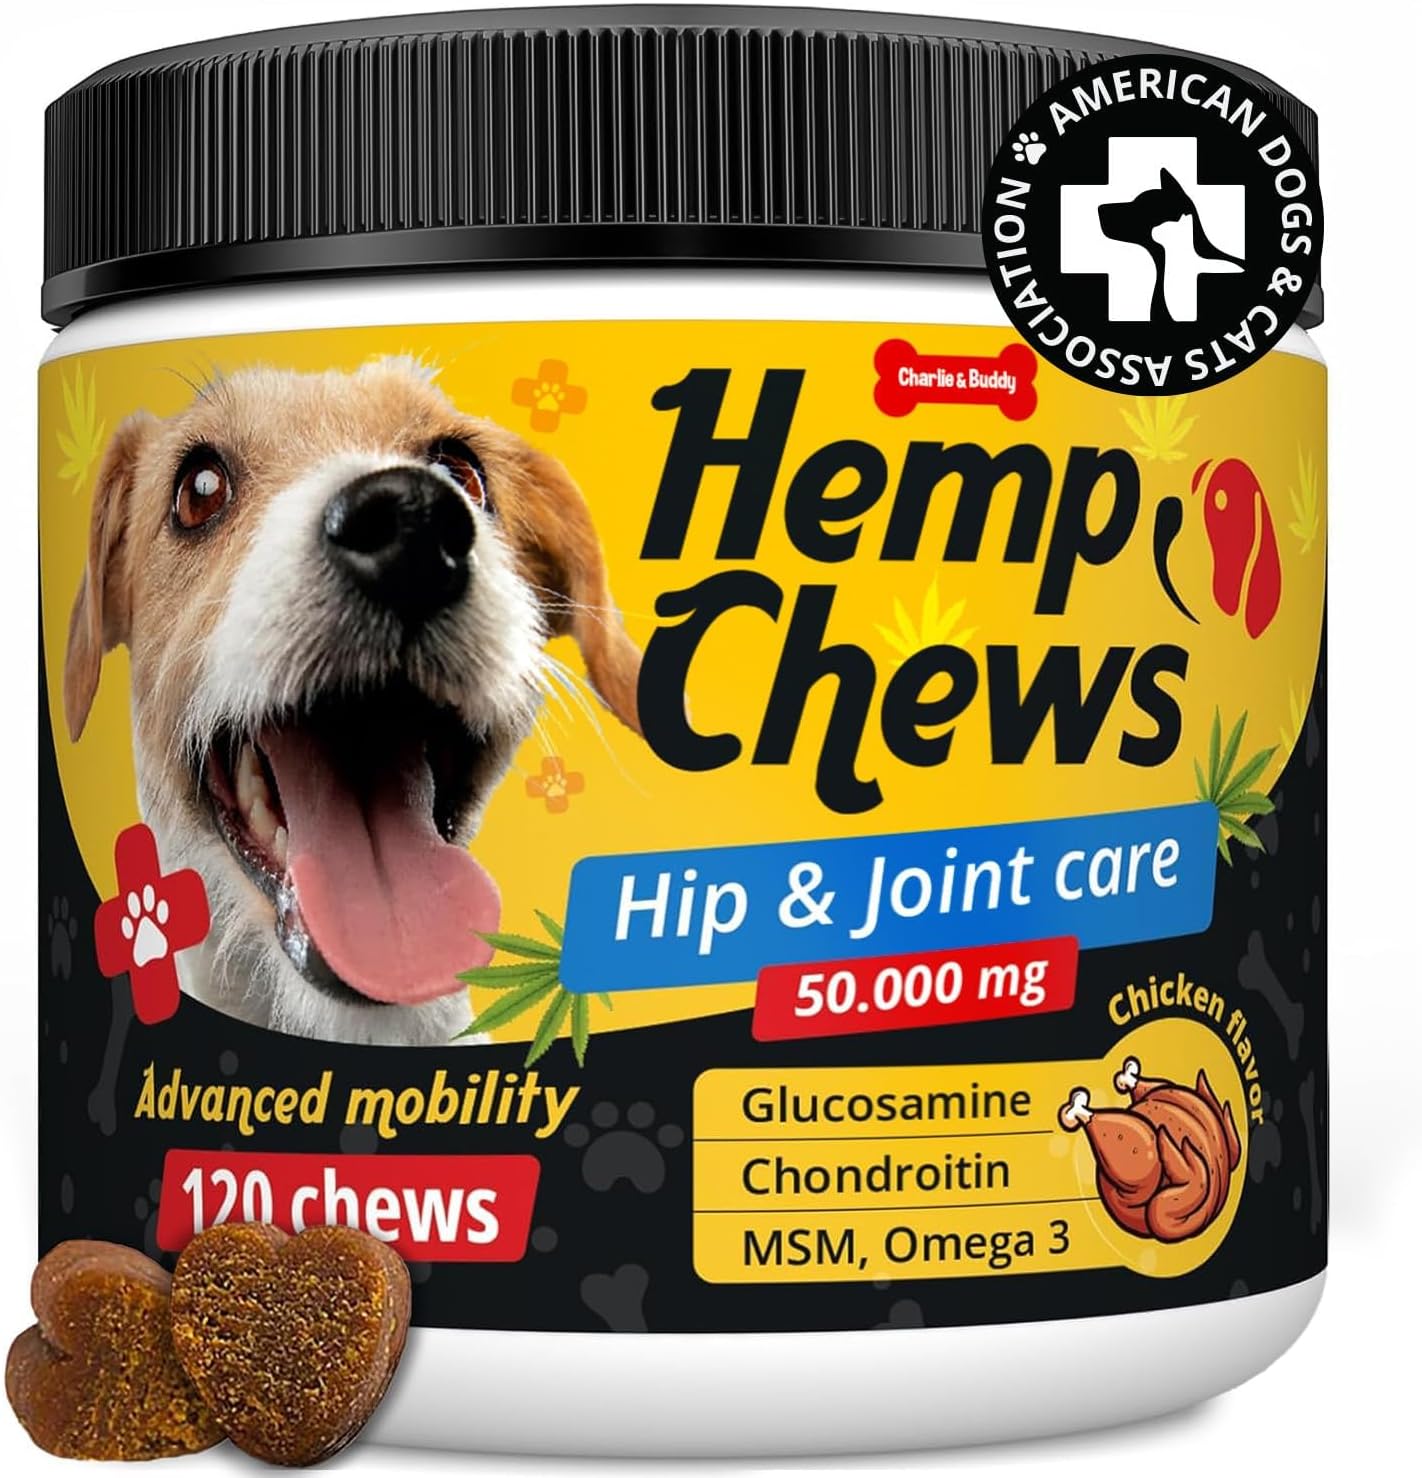 H?mp Hi? and J?int Supplement for Dogs - 120 H?mp Treats with Glucosamine, Chondroitin, MSM, Turmeric - Dog J?int P?in R?lief Chews Improve Mobility, Fl?xibility, Str?ngthen Bones, Speed up R?covery